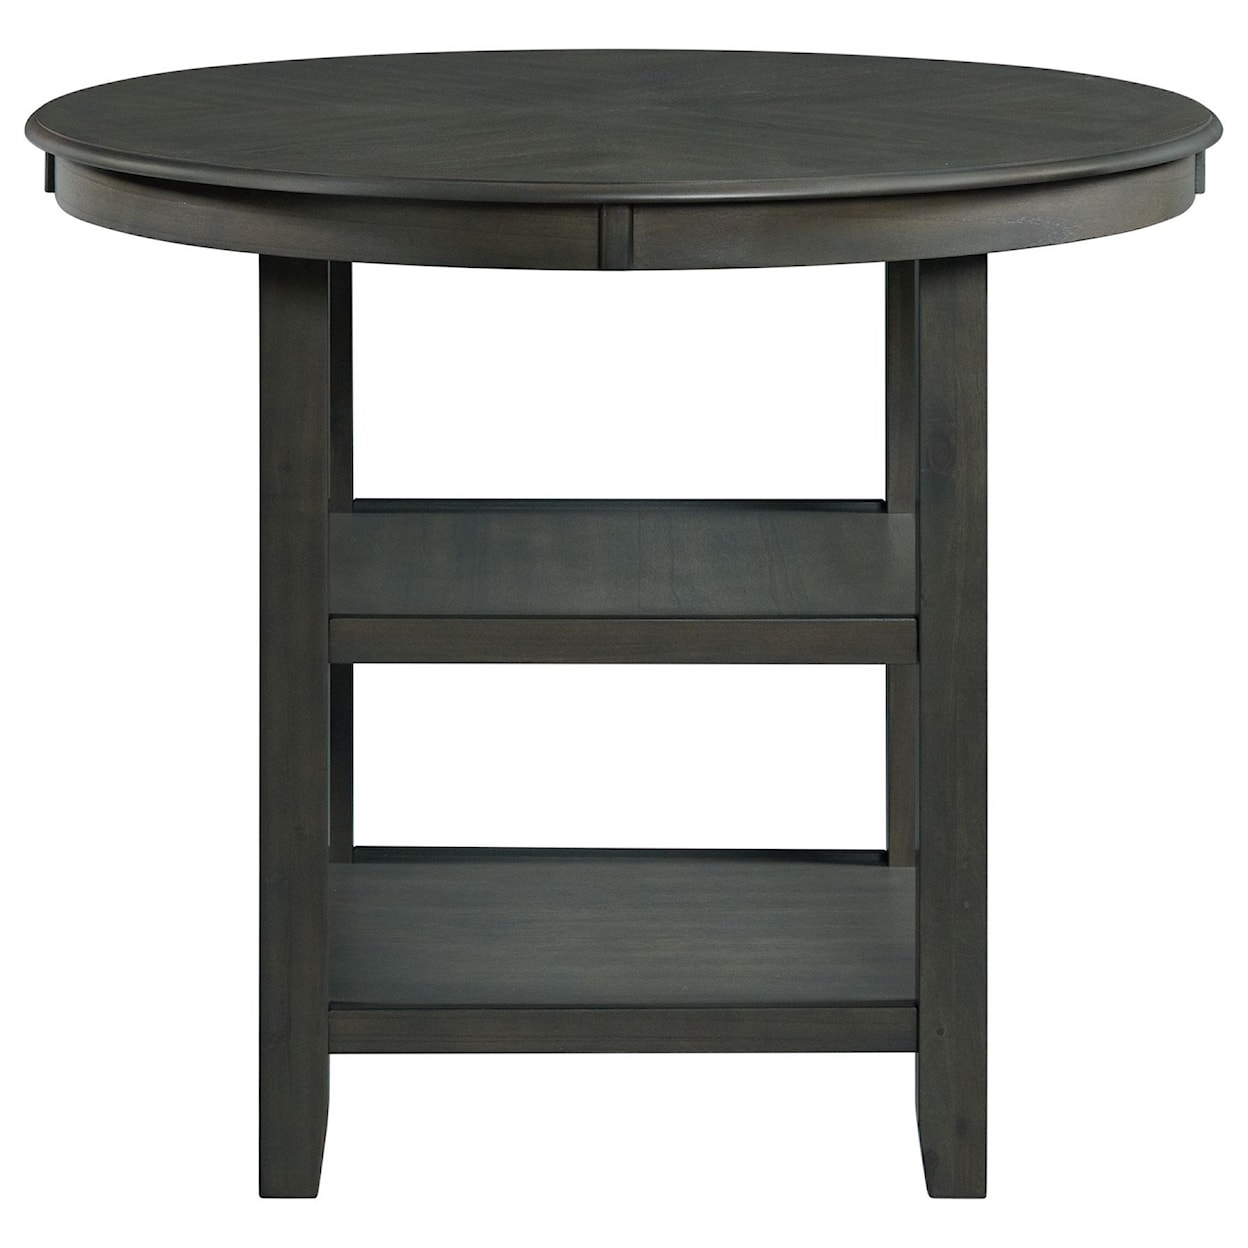 Elements International Amherst Counter Height Dining Table